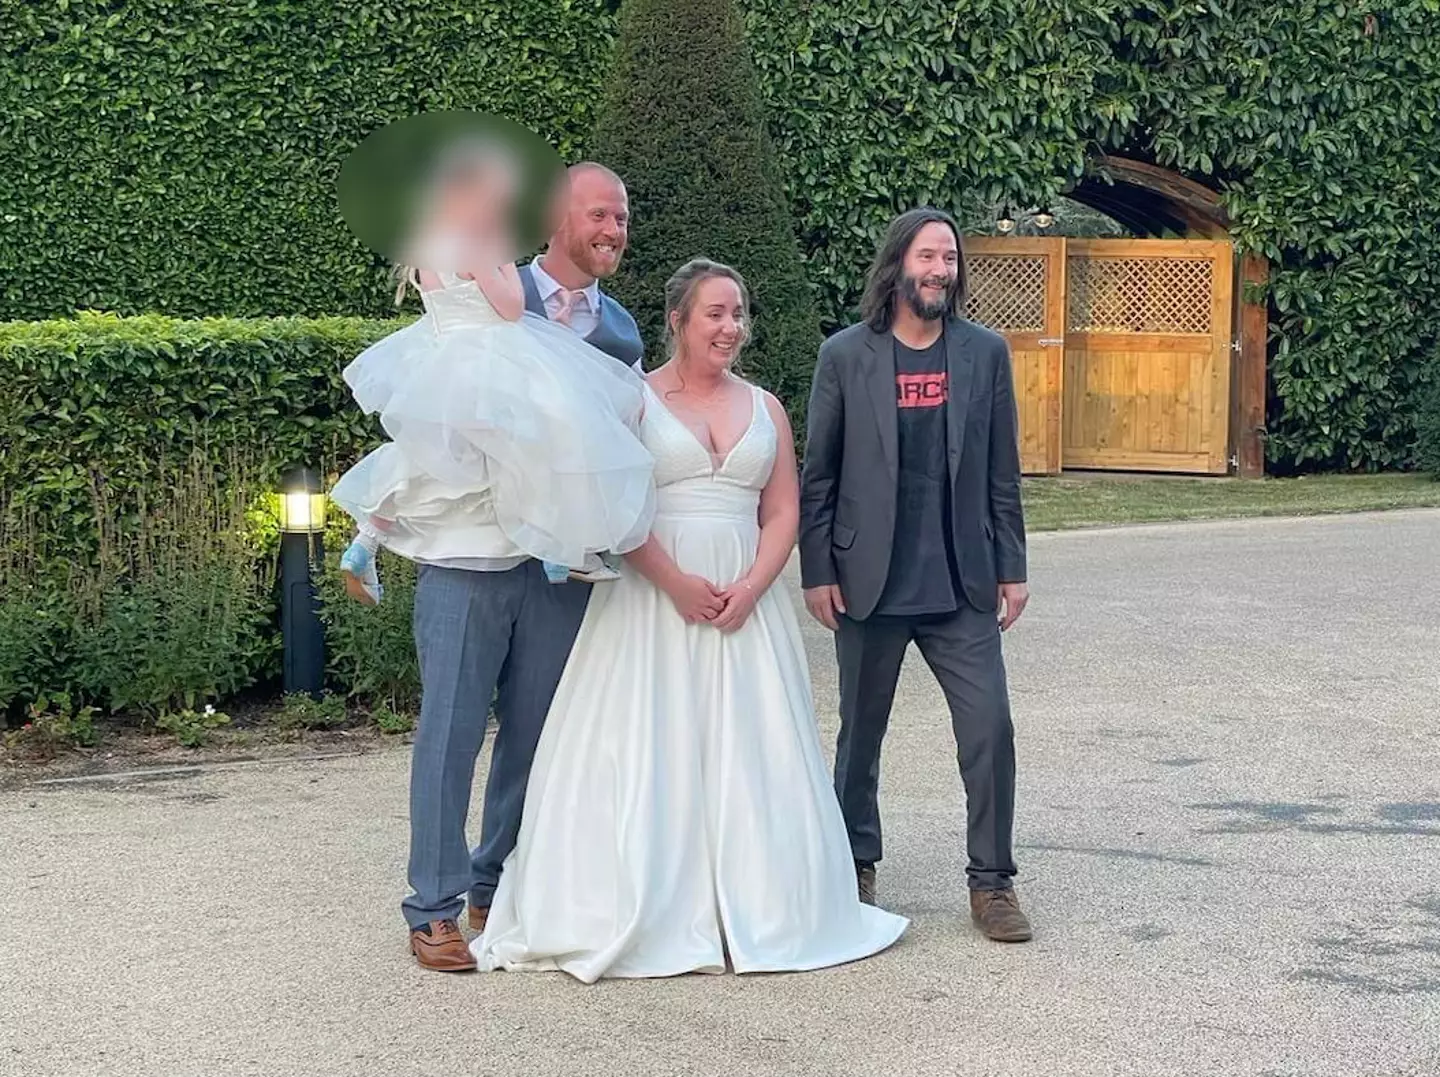 Keanu was happy to pose for some snaps with the newlyweds.